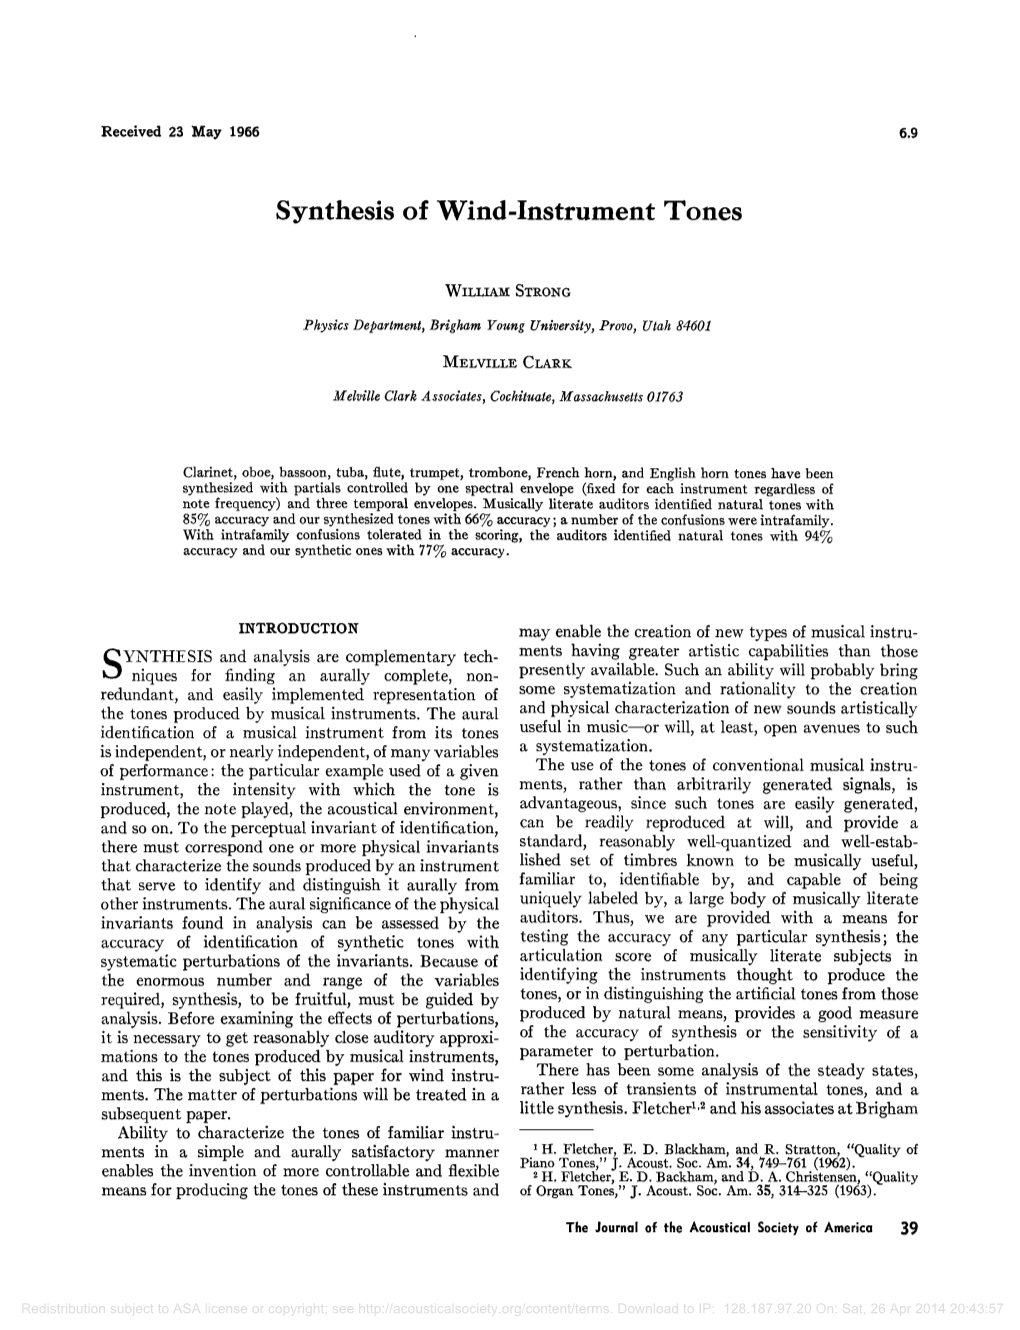 Synthesis of Wind-Instrument Tones